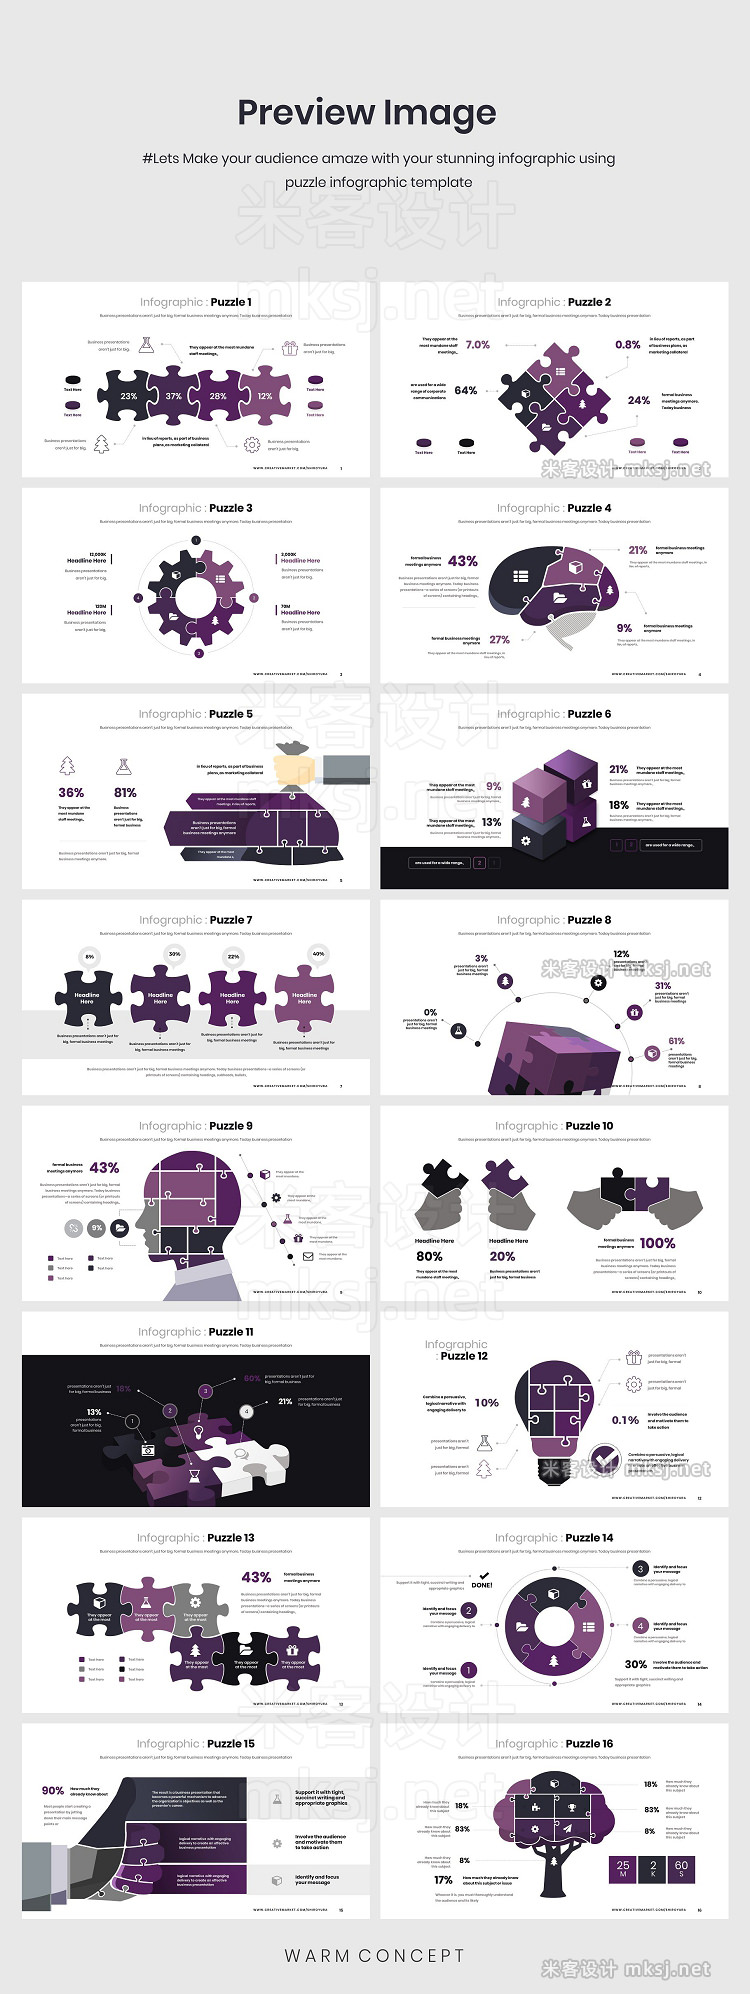 PPT模板 Puzzle Infograpic PowerPoint